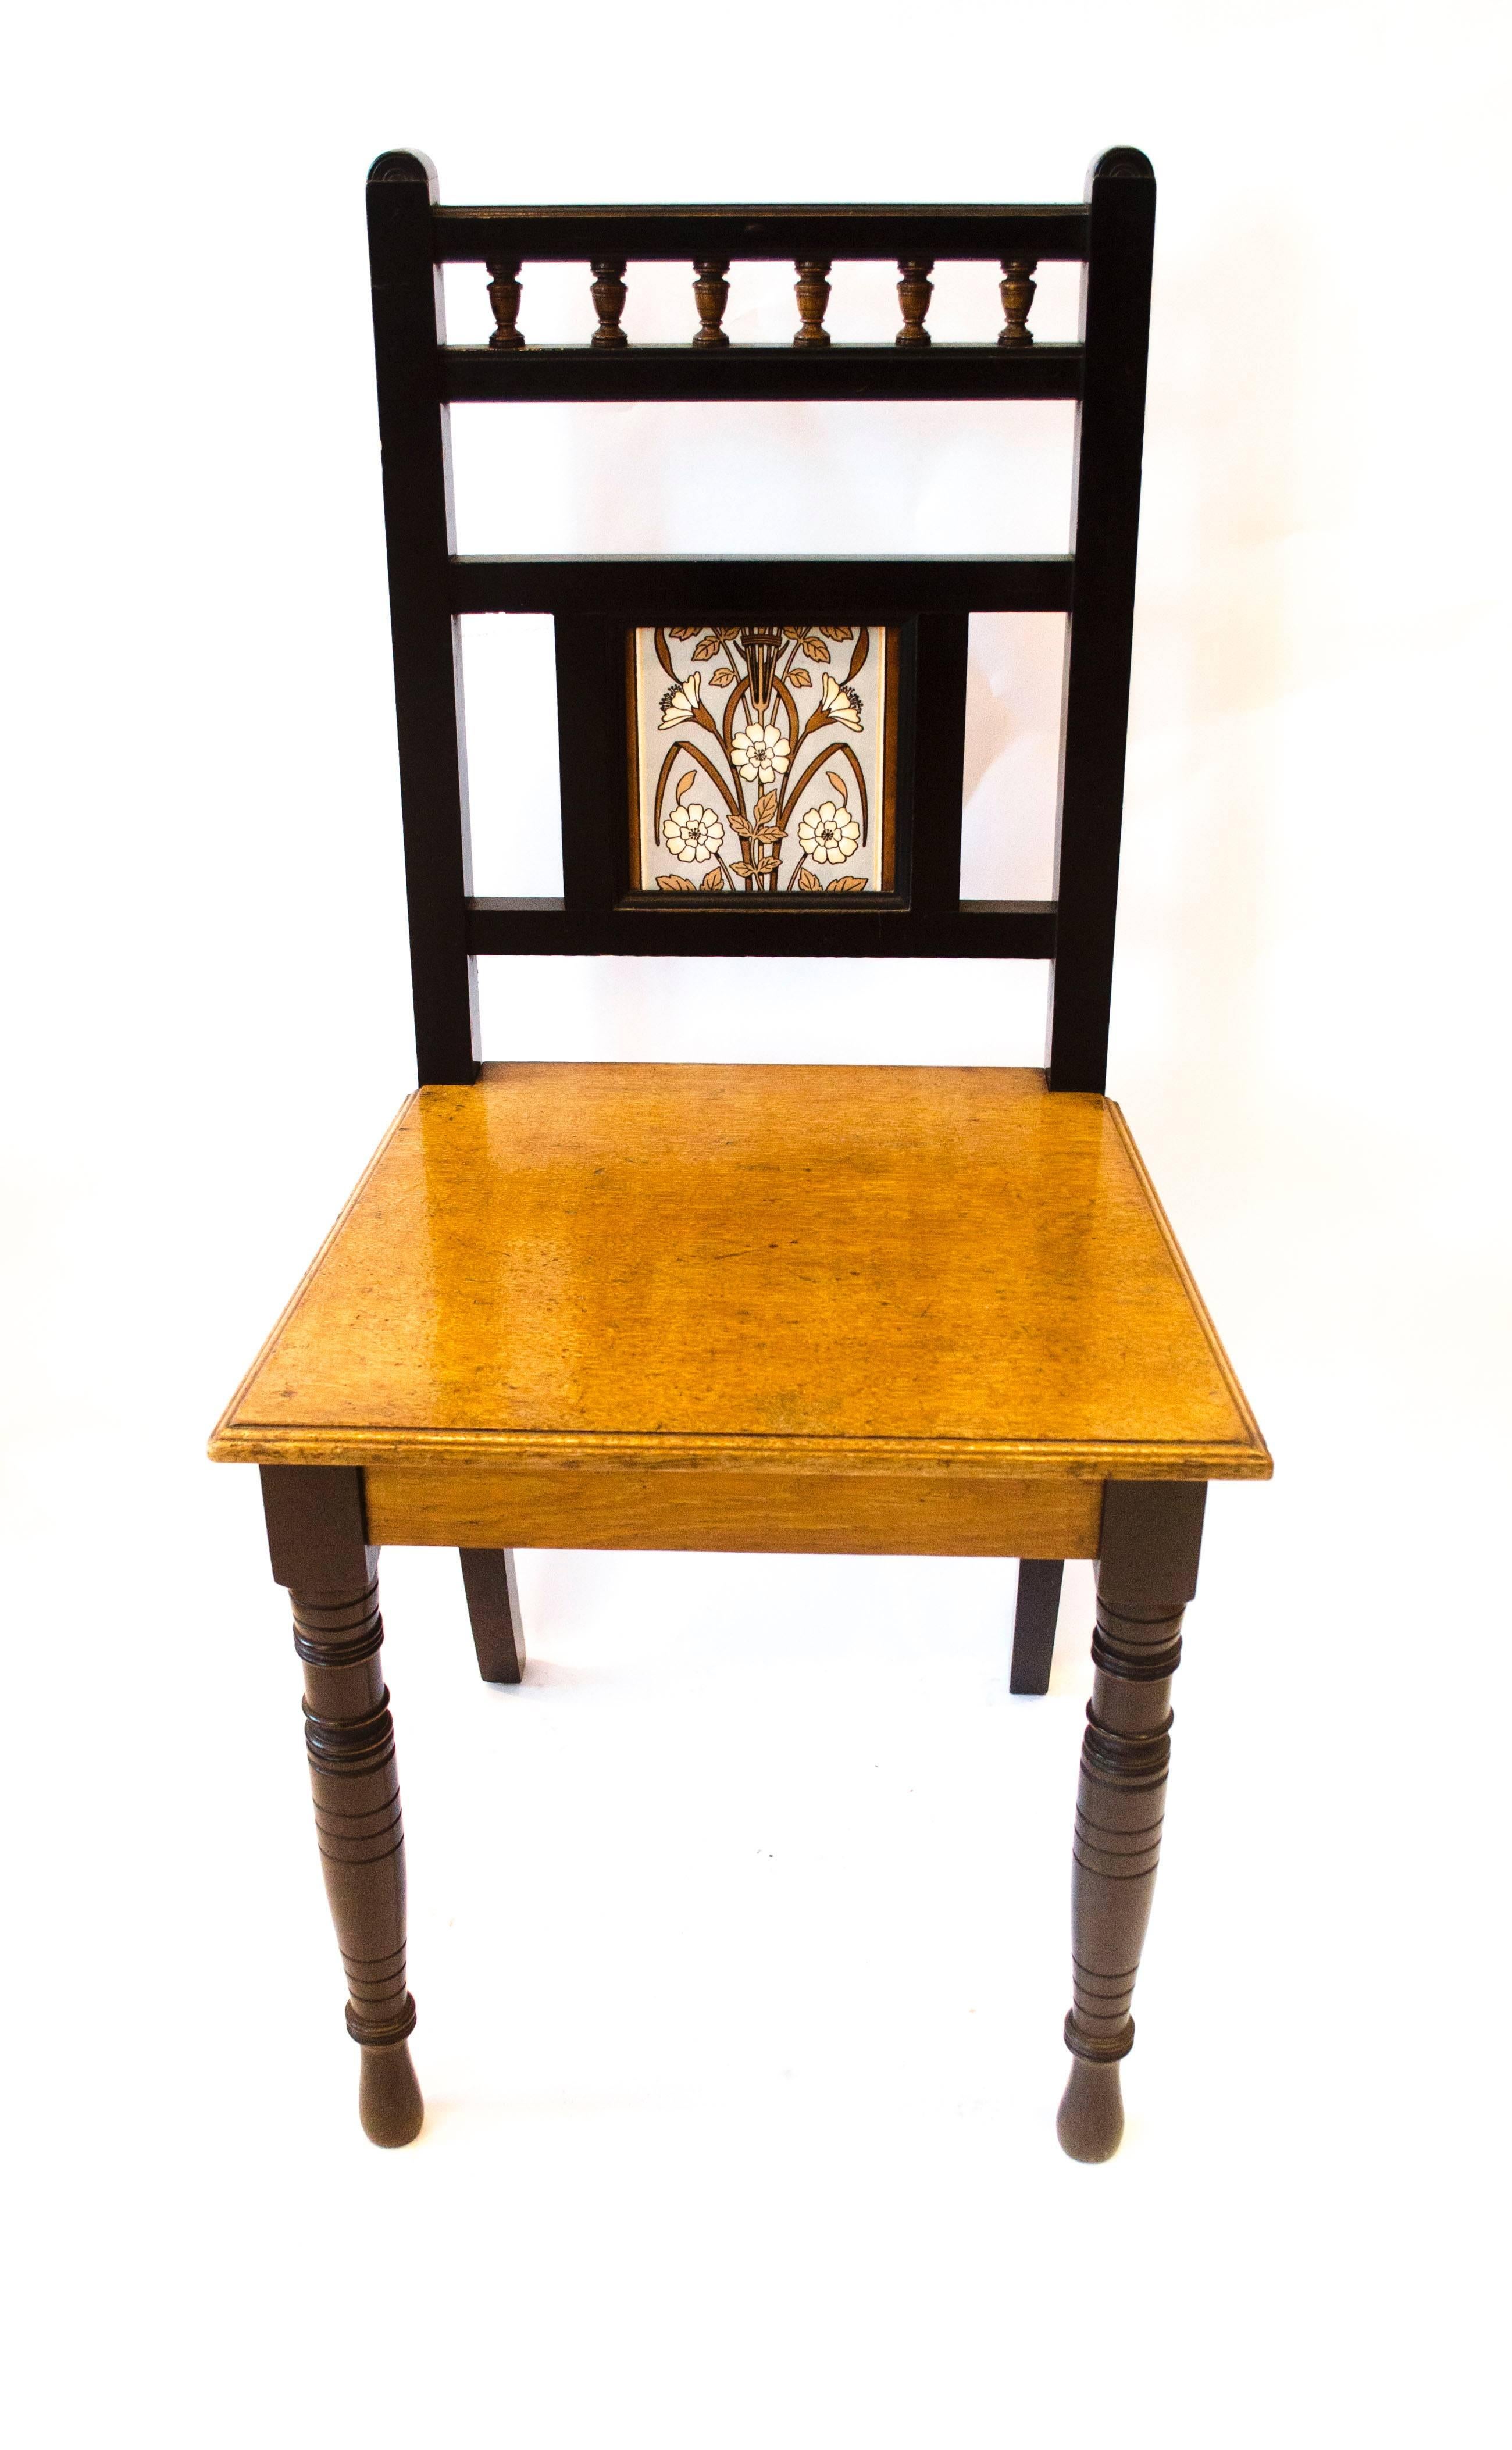 Bruce Talbert (attributed), an ebonized and walnut hall chair, inset with Minton's tile designed by Dr Christopher Dresser.

